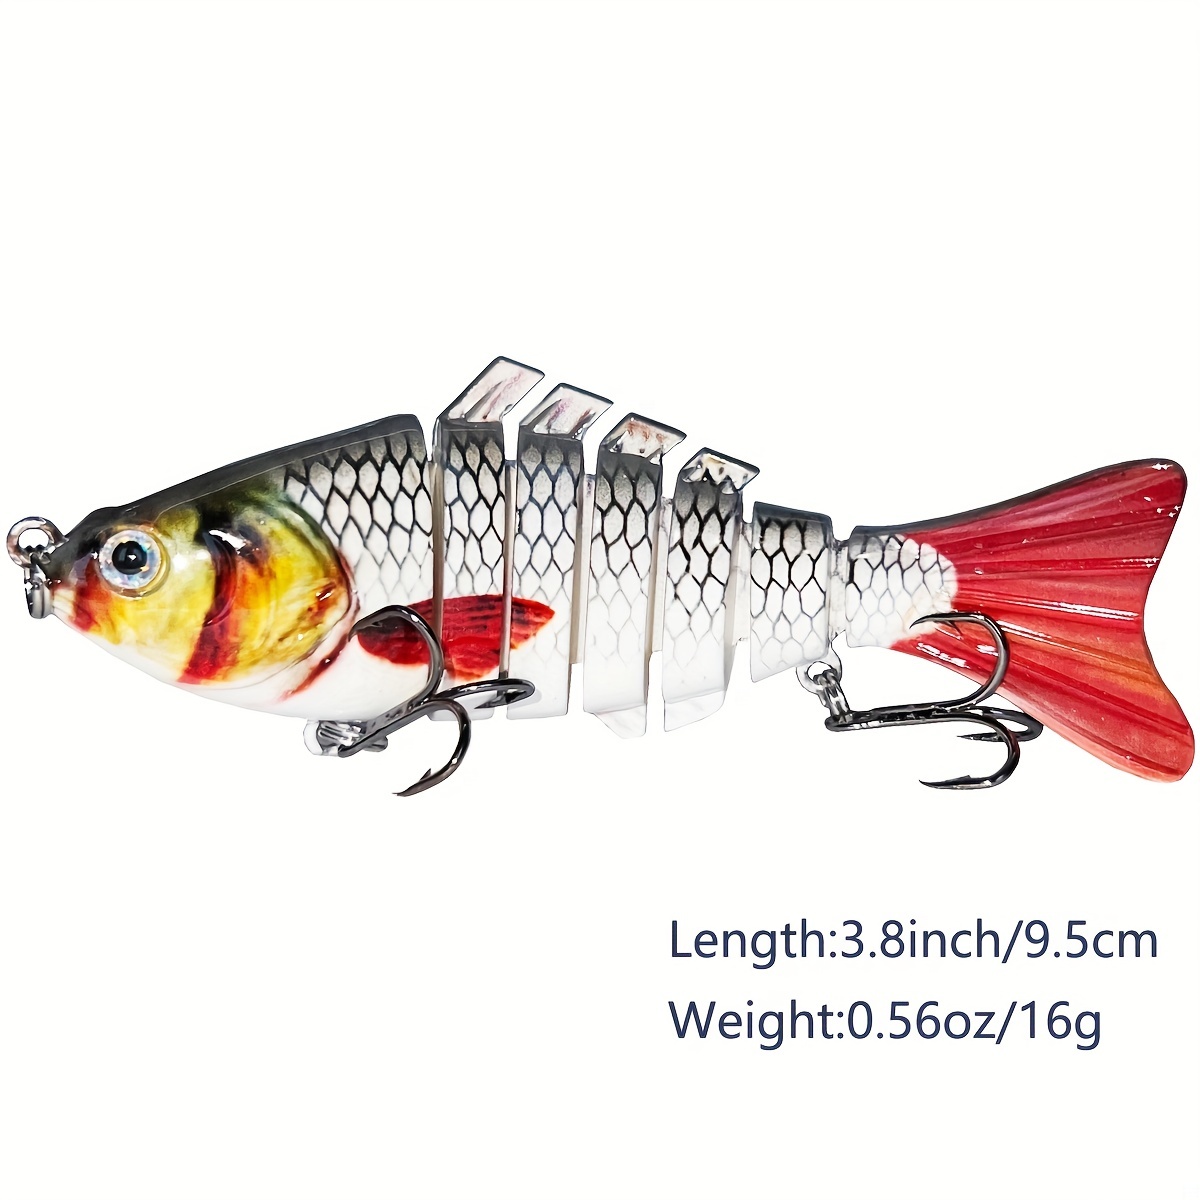 Buy Lovso Fish® 2 Inch Small Micro Multi Jointed Fishing Lure Life